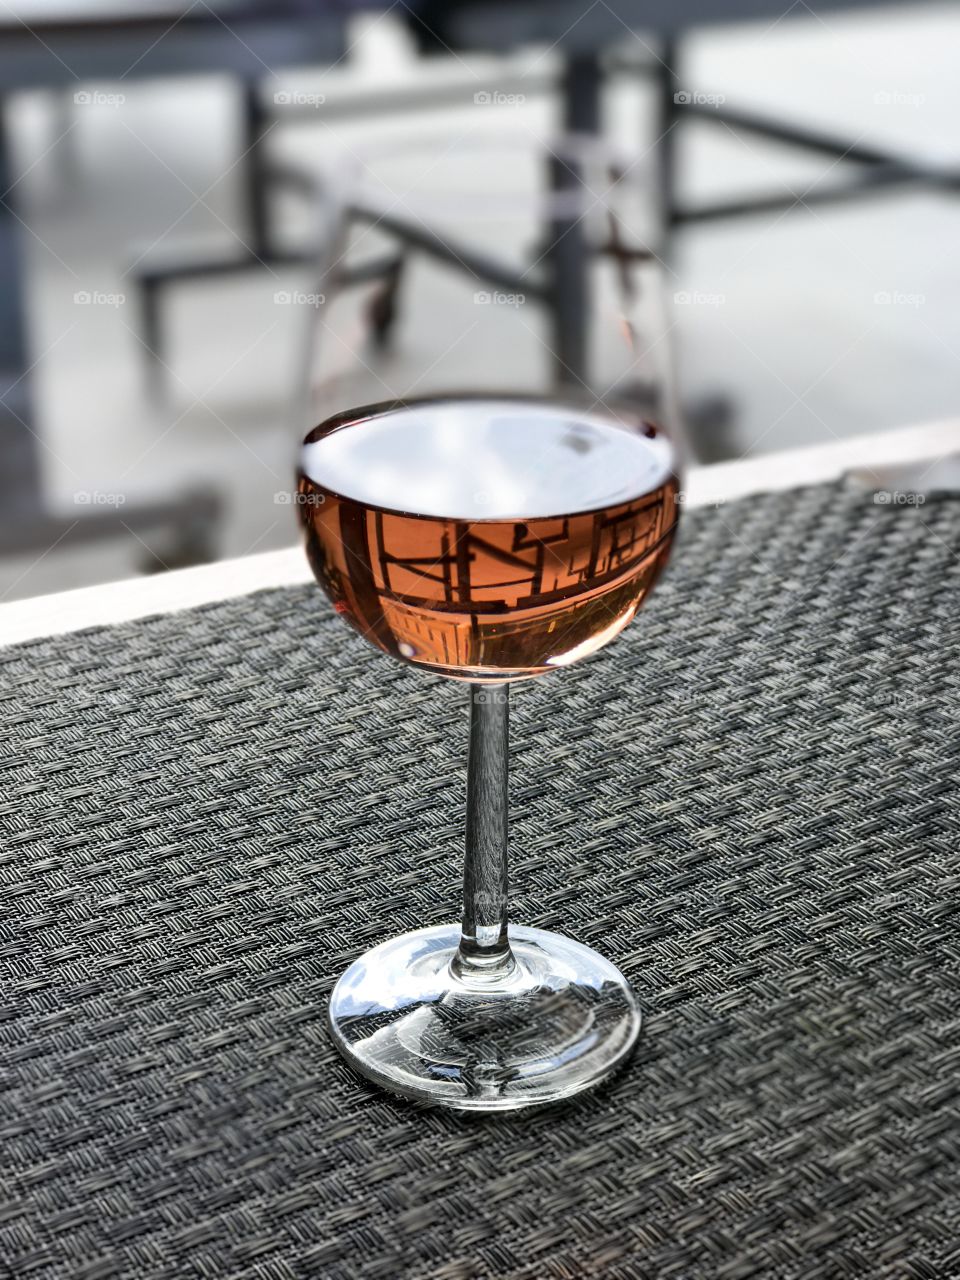 Glass of rose wine on a wooden table.